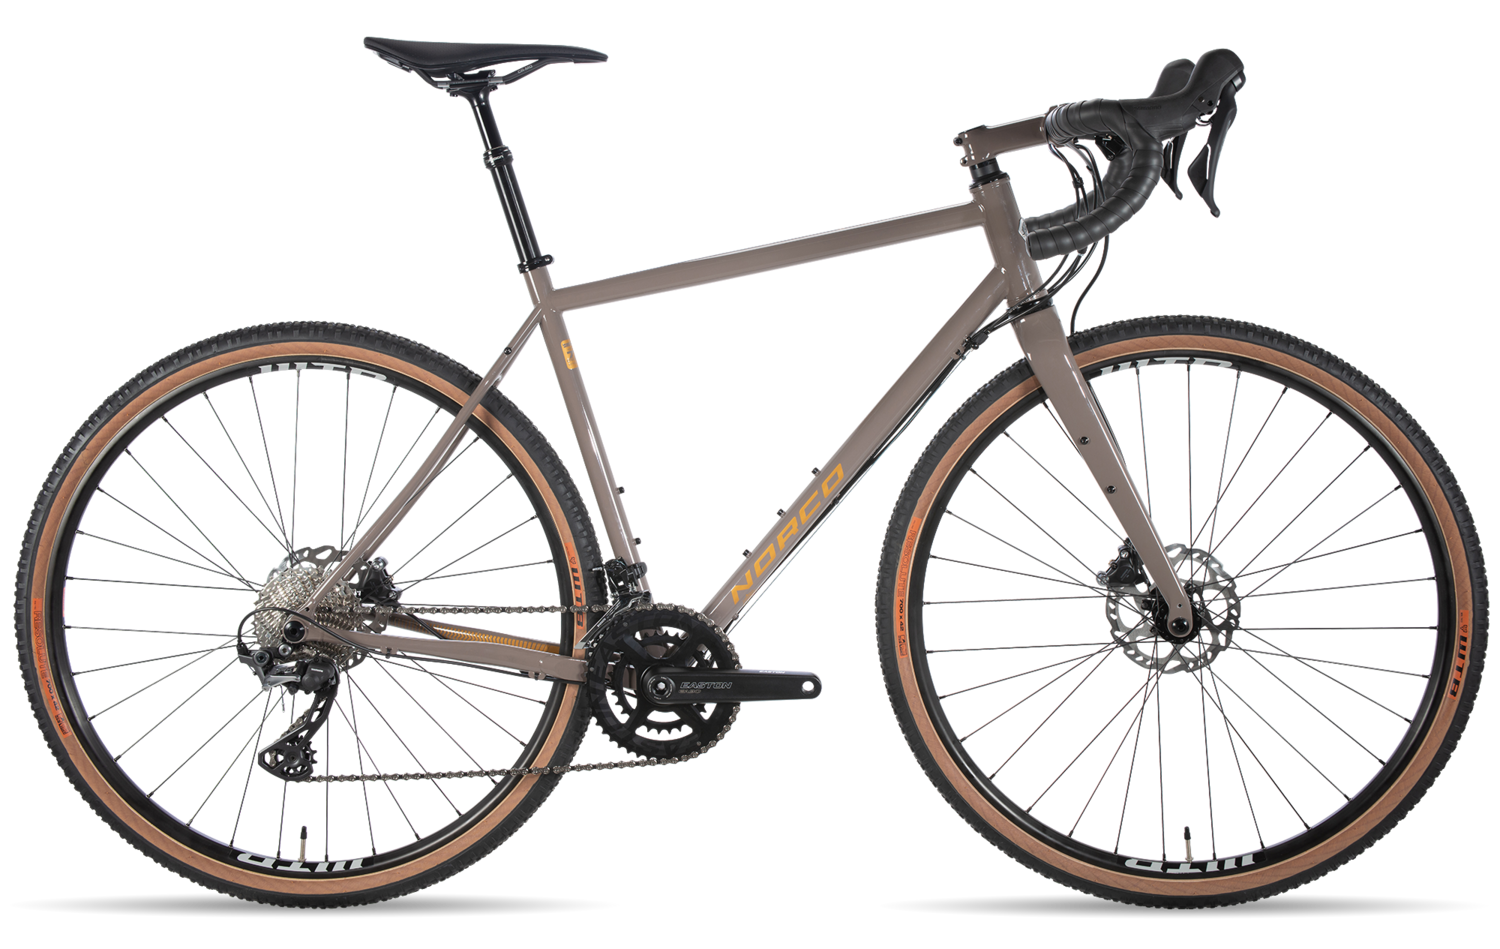 2020 - 2022 Norco search XR S1 -, Color: Warm Grey -, Size: 45.5cm ( roues 27 )